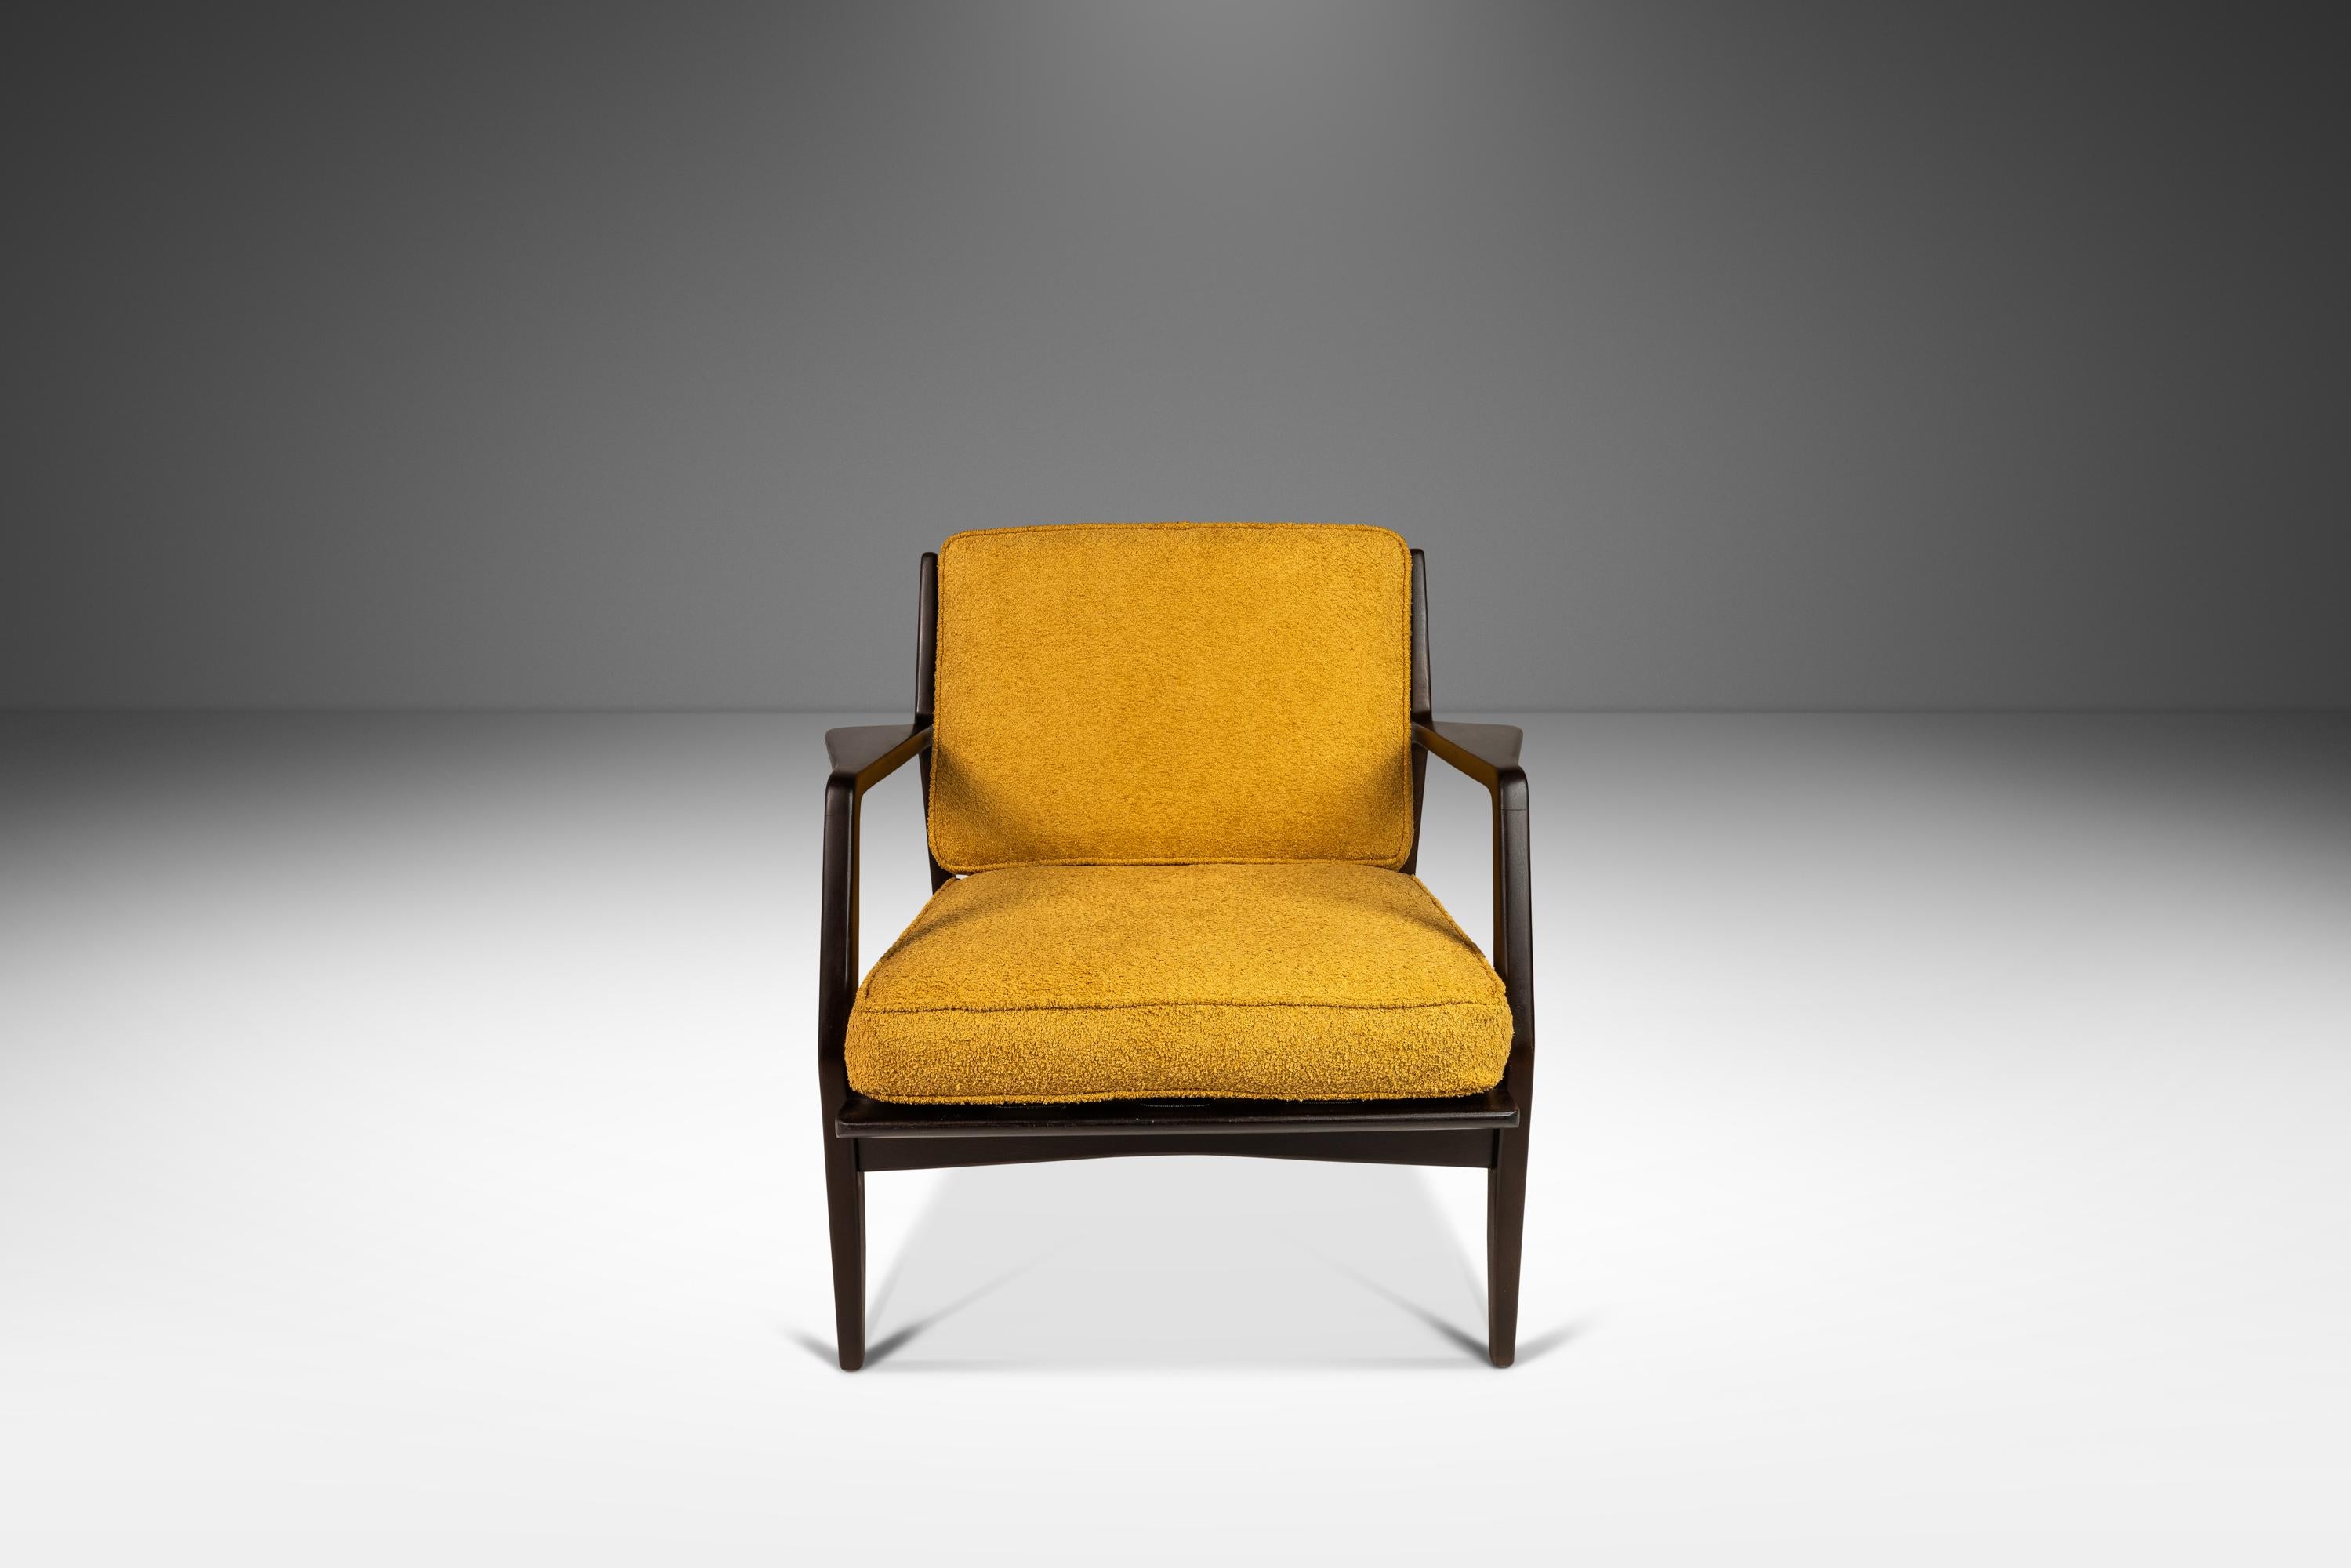 Introducing an ultra-rare Model 596 Lounge Chair in solid Beech originally designed by the renowned Lawrence Peabody for Selig. This iconic armchair has recently been fully restored and newly upholstered in a fabulous faded Canary yellow cotton